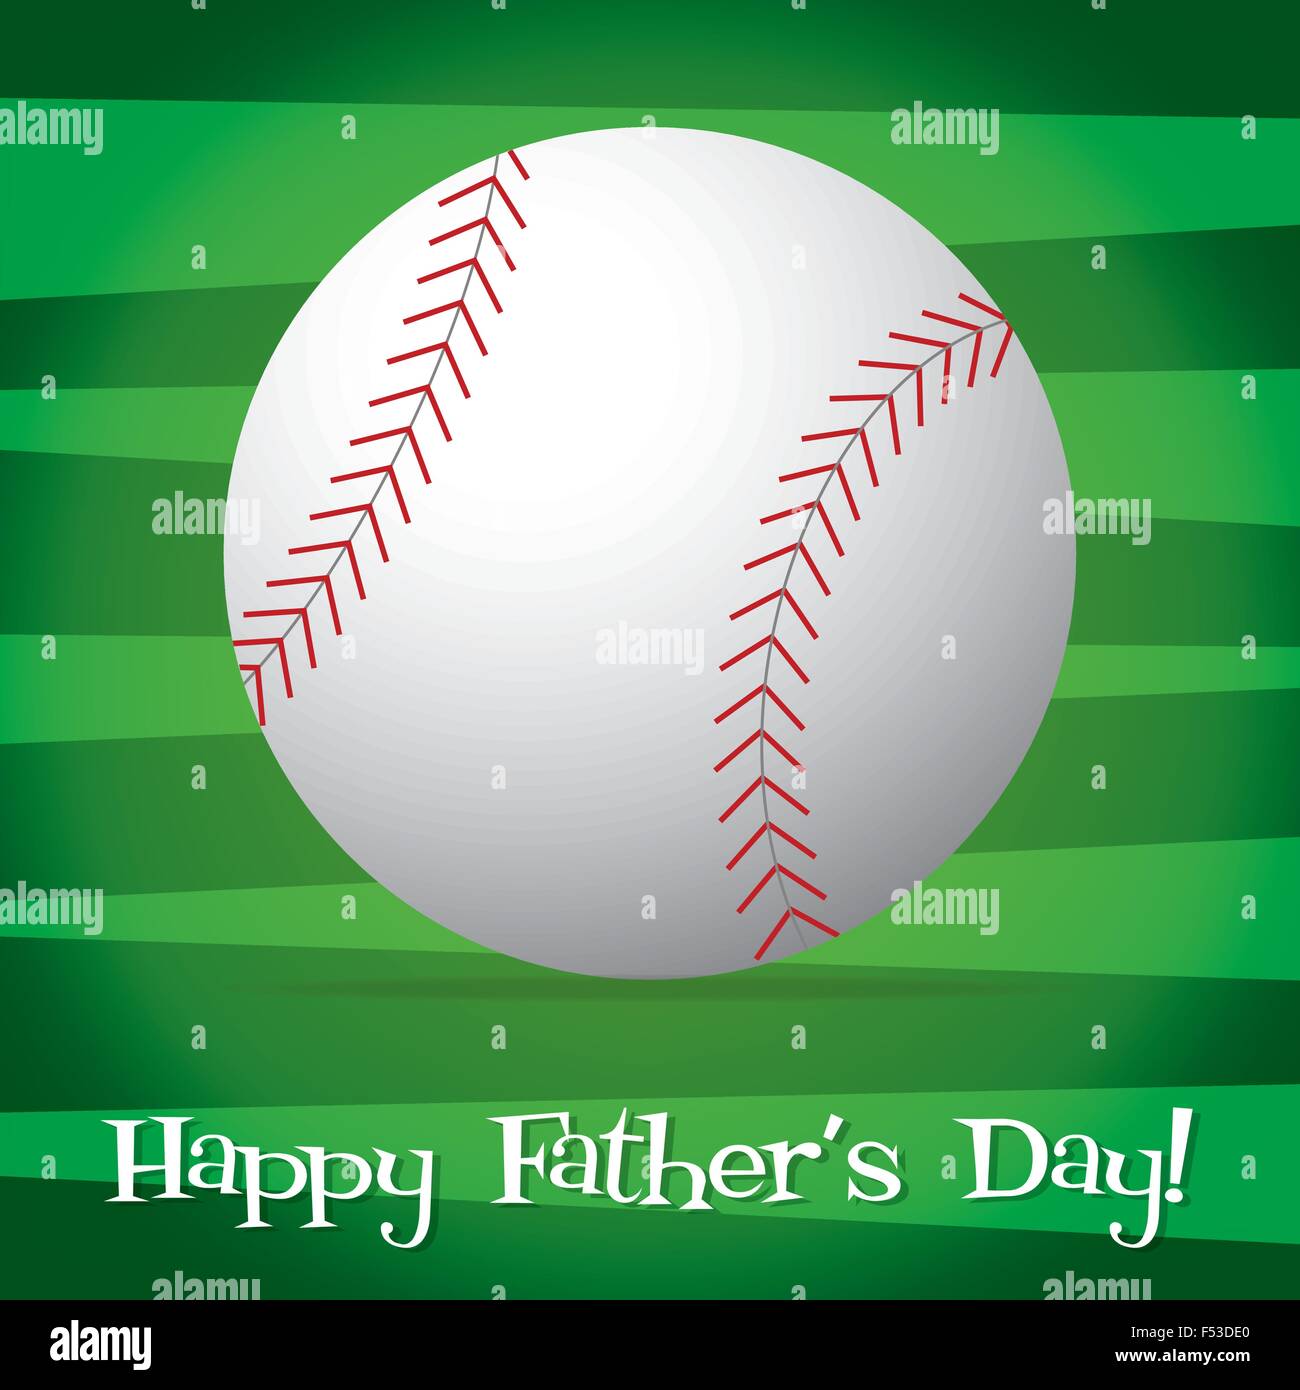 Baseball Father's Day card in vector format Stock Vector Image